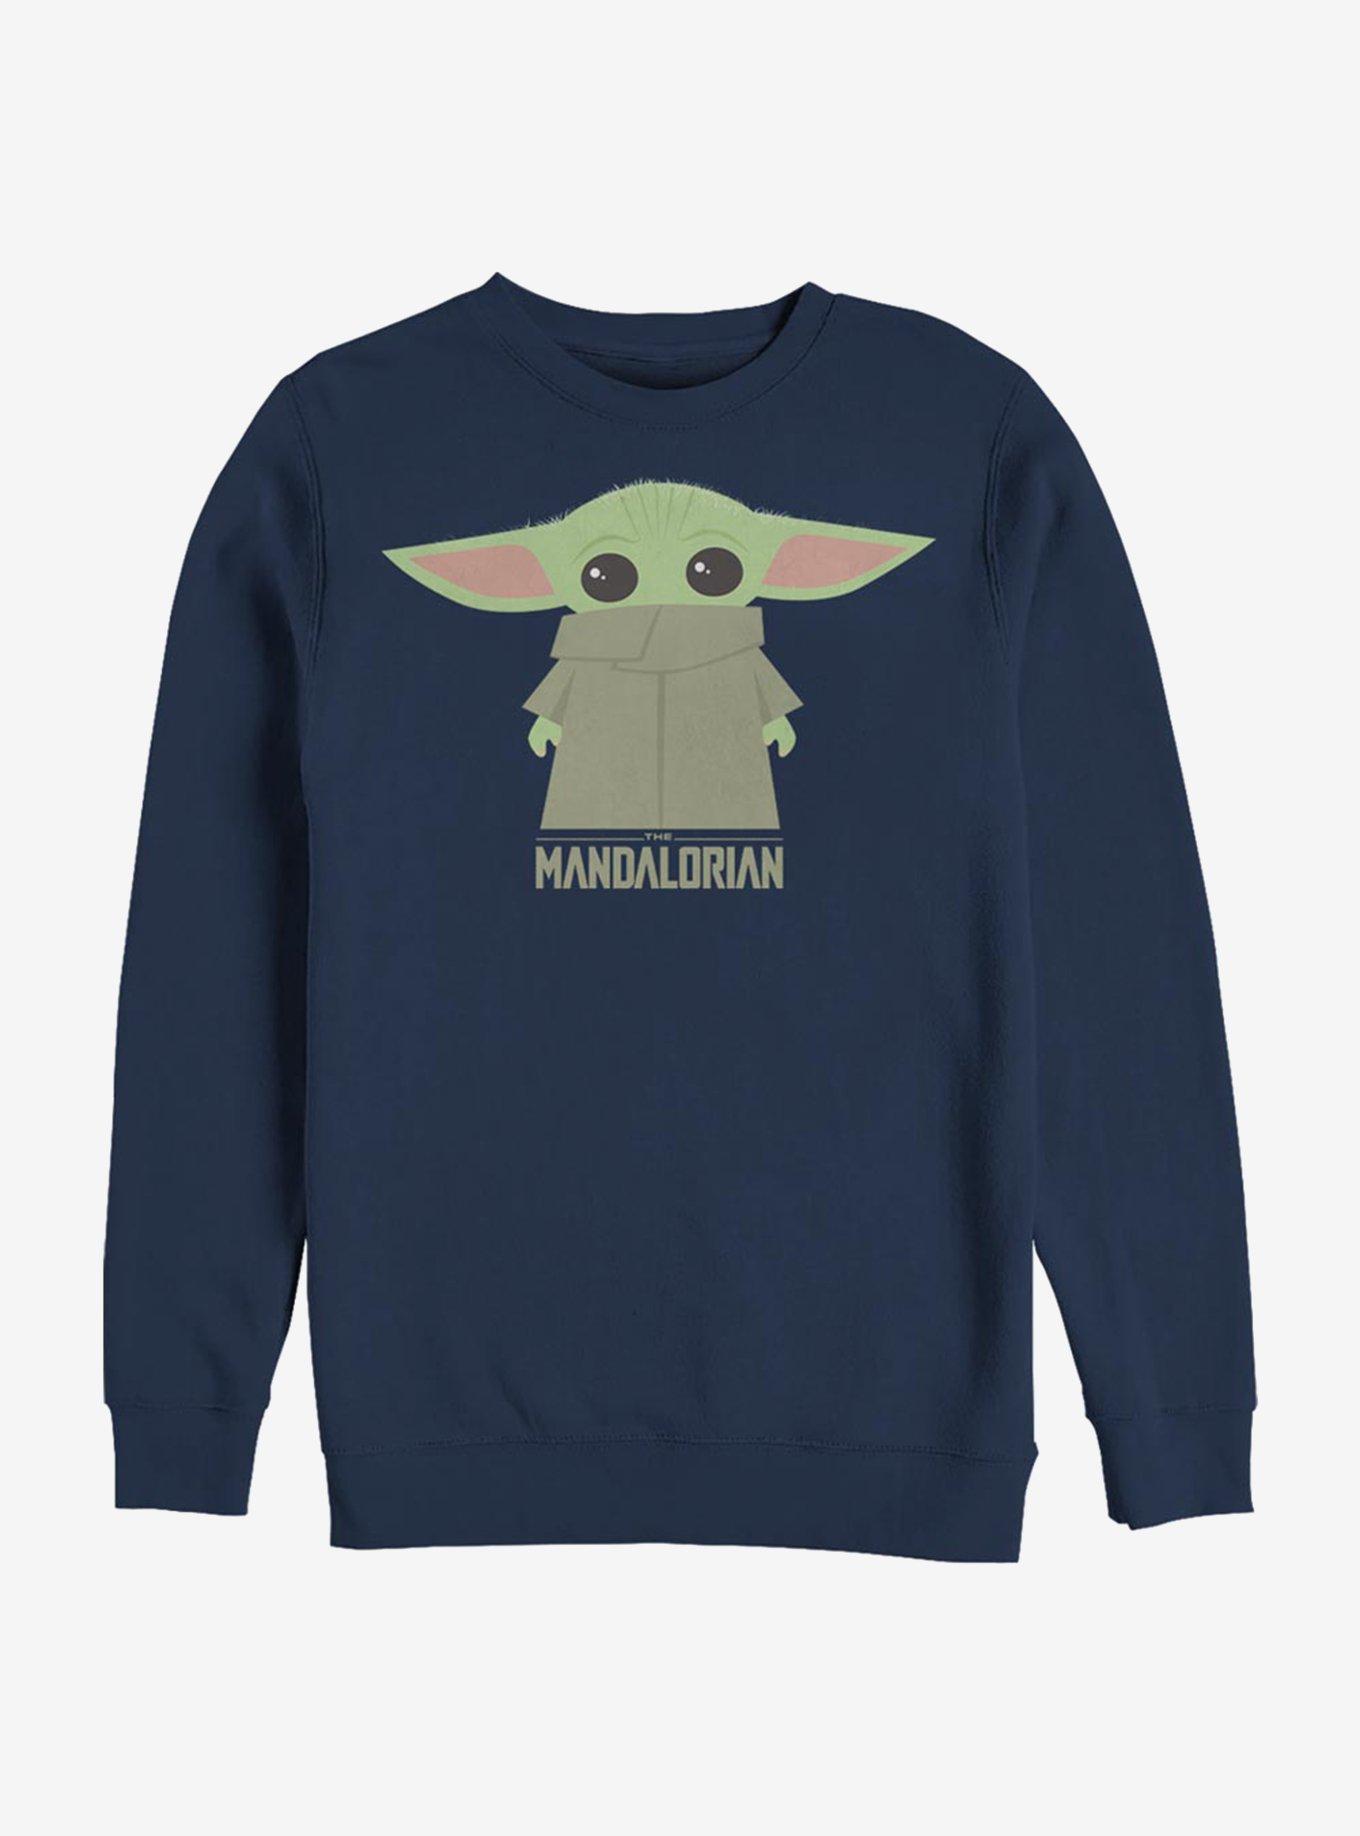 Star Wars The Mandalorian The Child Covered Face Crew Sweatshirt, NAVY, hi-res